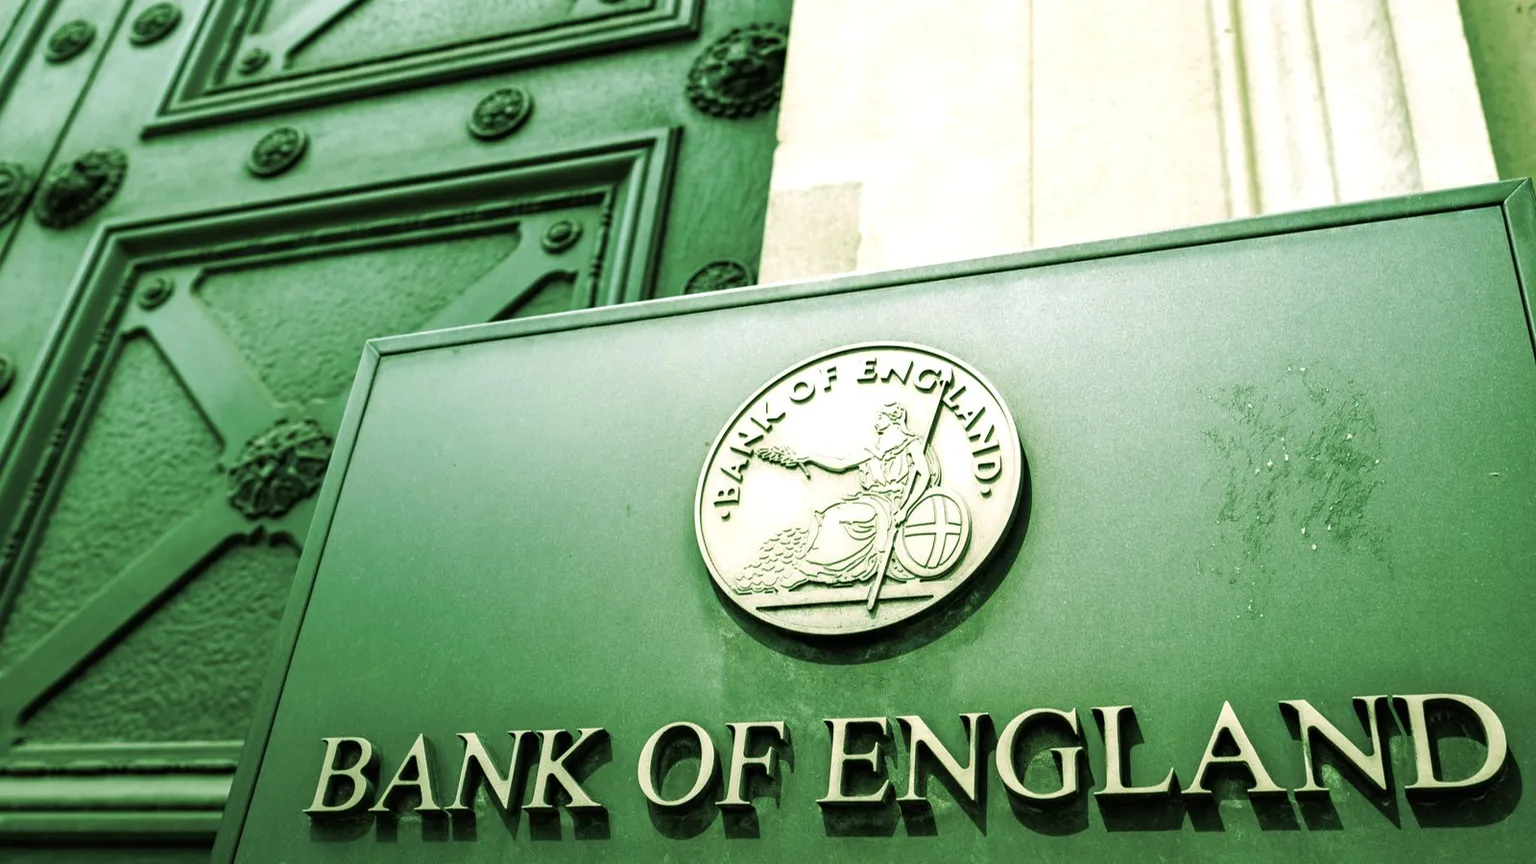 The Bank of England is the central bank in the UK. Image: Shutterstock